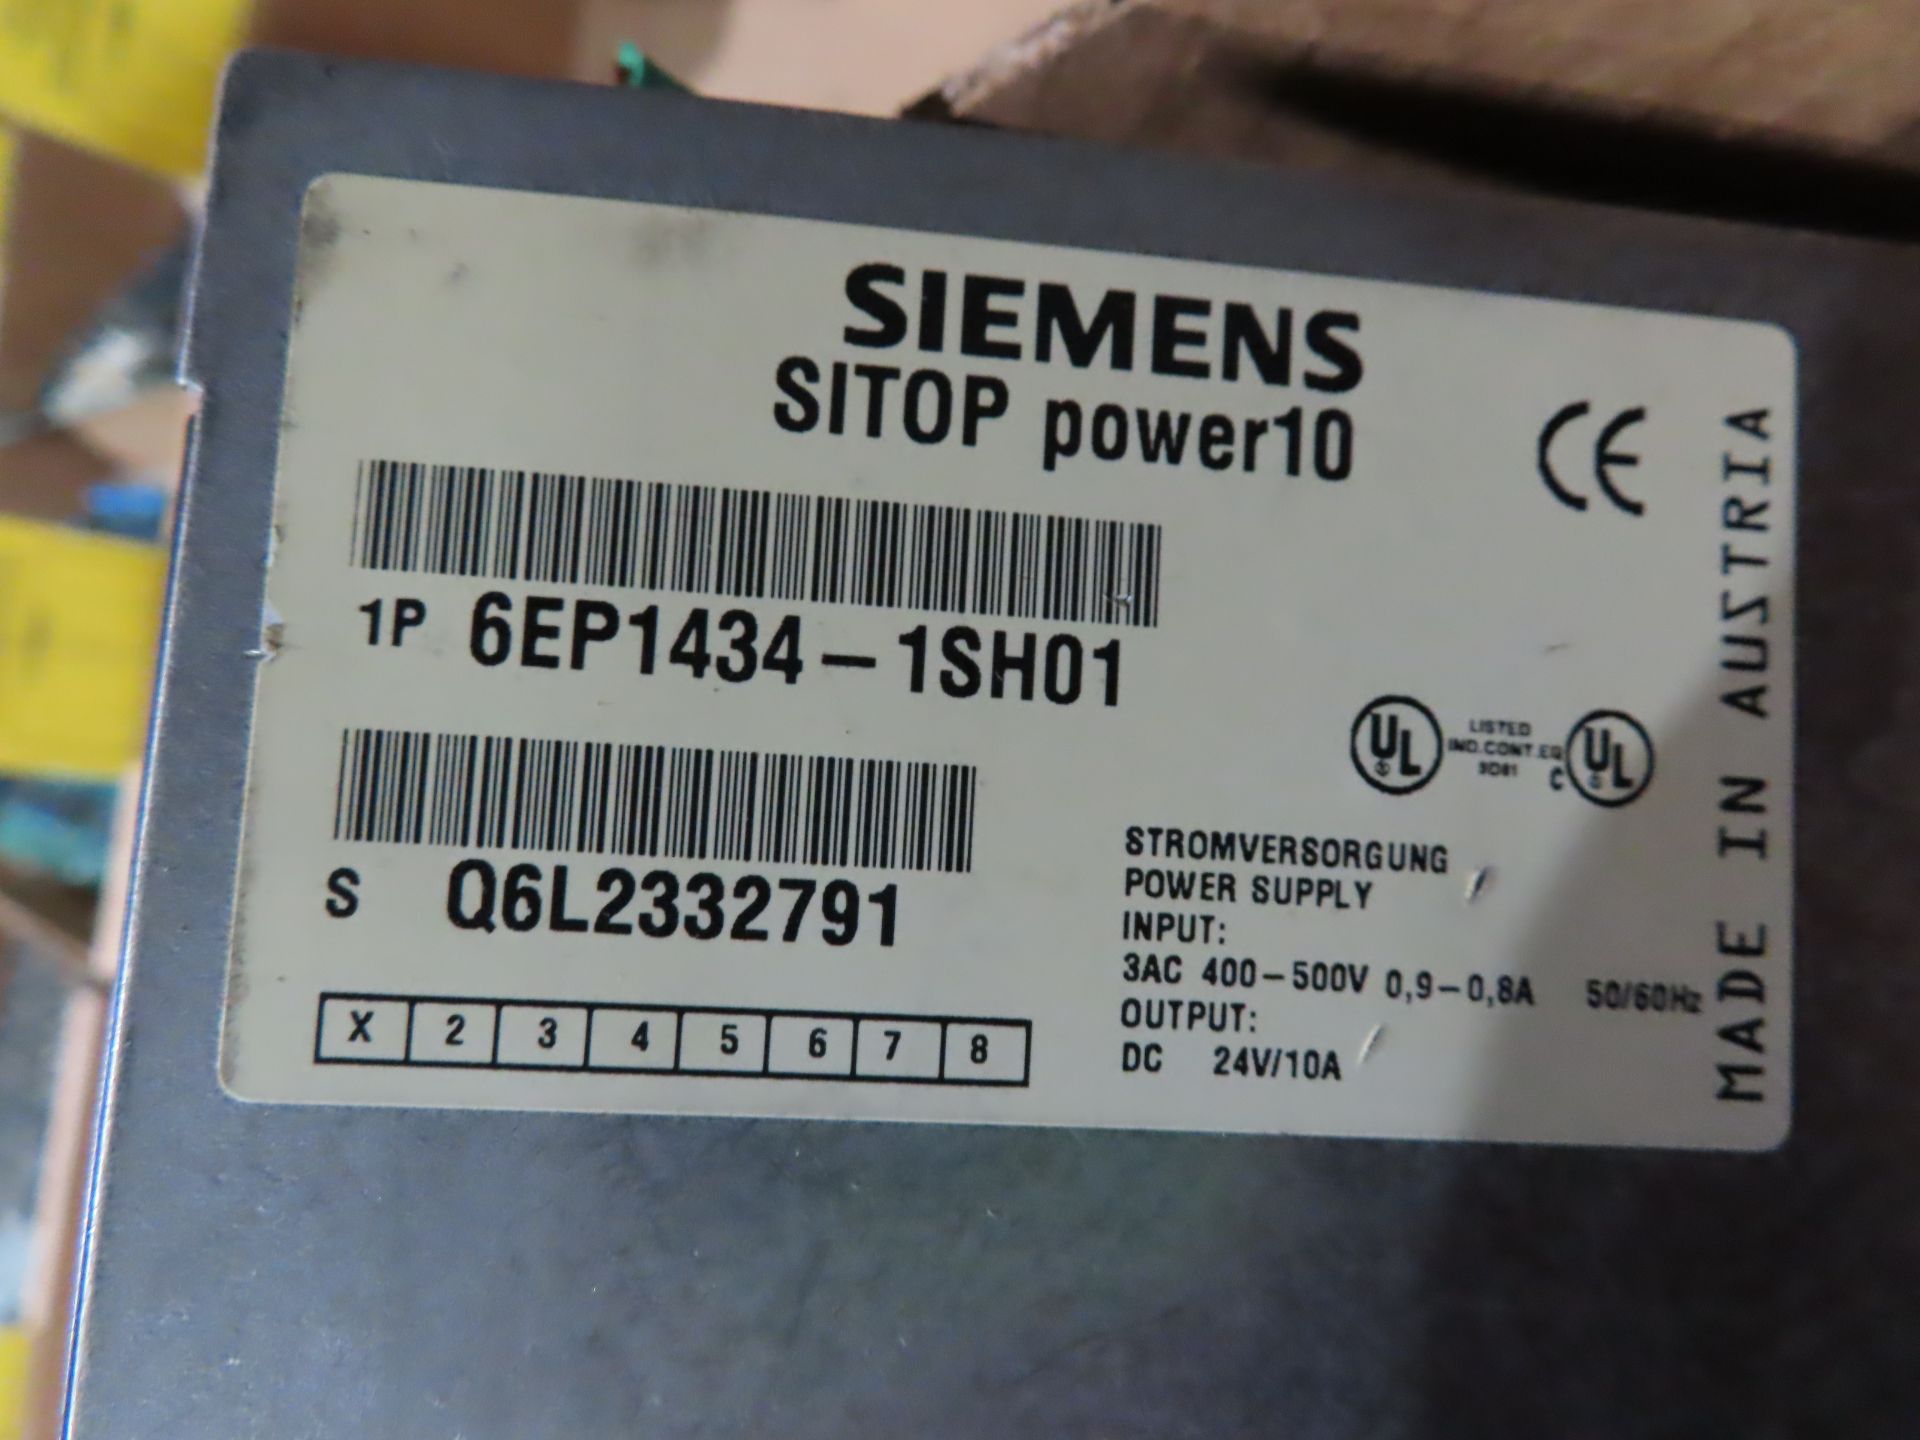 Siemens model 6EP1434-1SH01 power supply , as always, with Brolyn LLC auctions, all lots can be - Image 2 of 2